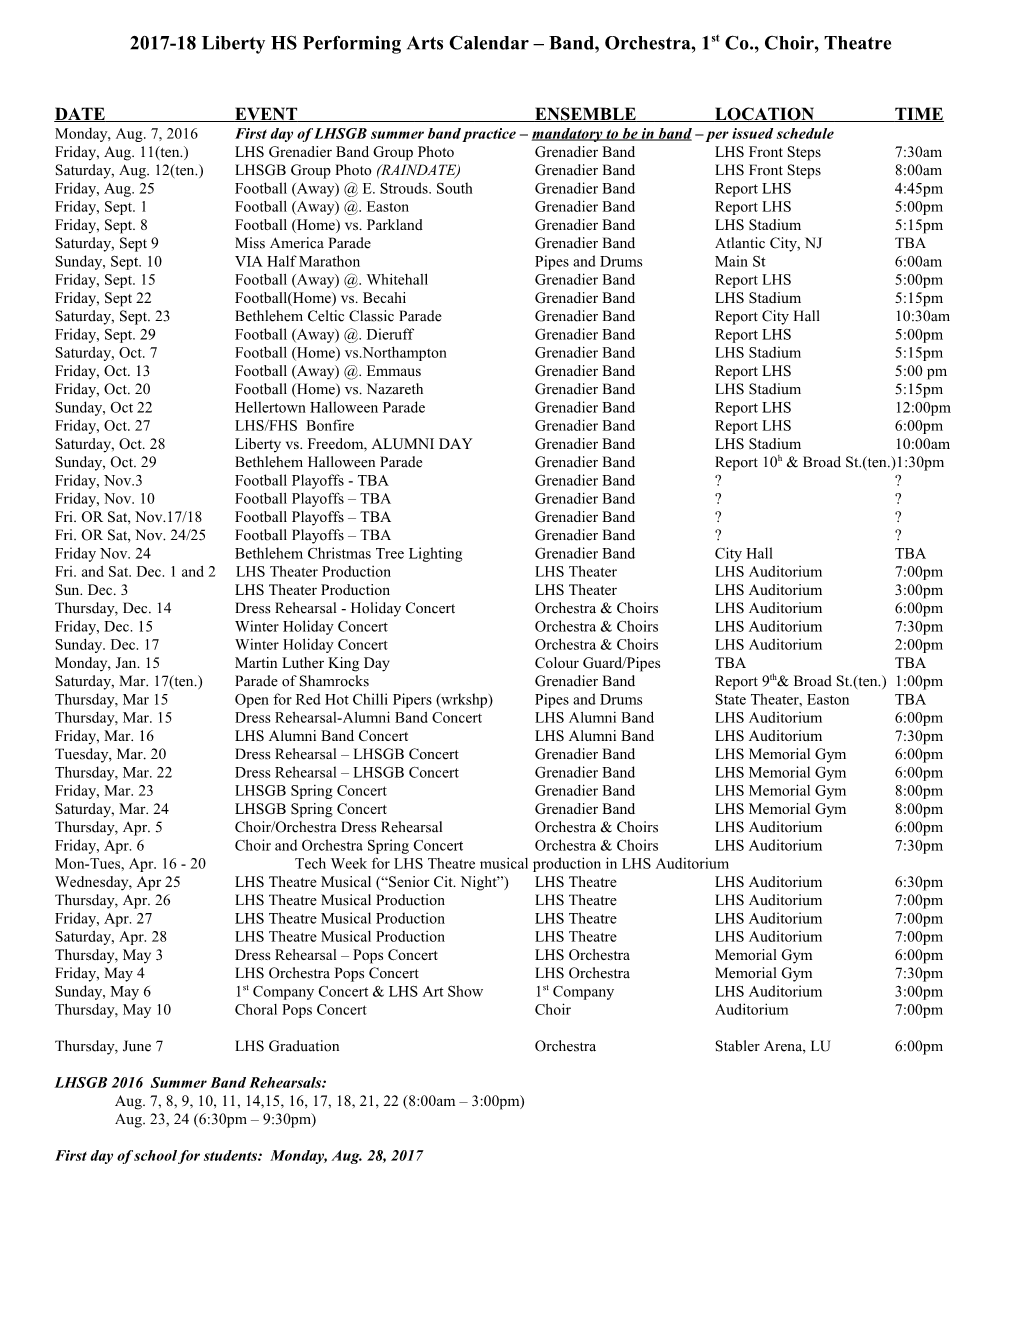 2017-18 Liberty HS Performing Arts Calendar Band, Orchestra, 1St Co., Choir, Theatre